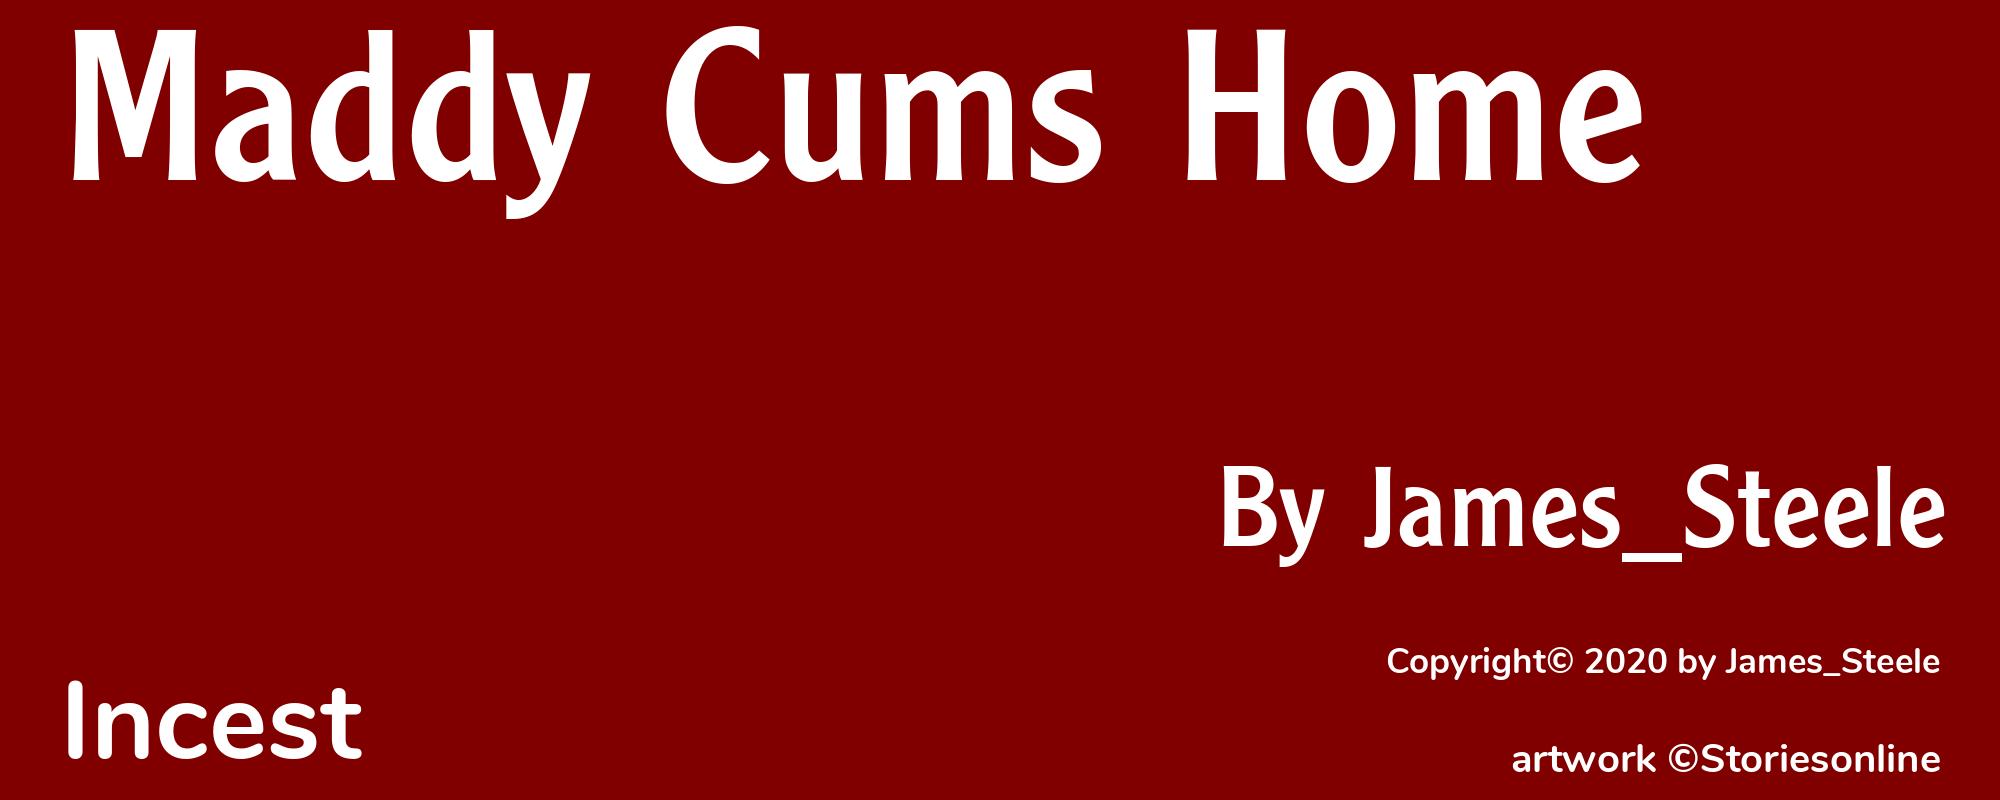 Maddy Cums Home - Cover